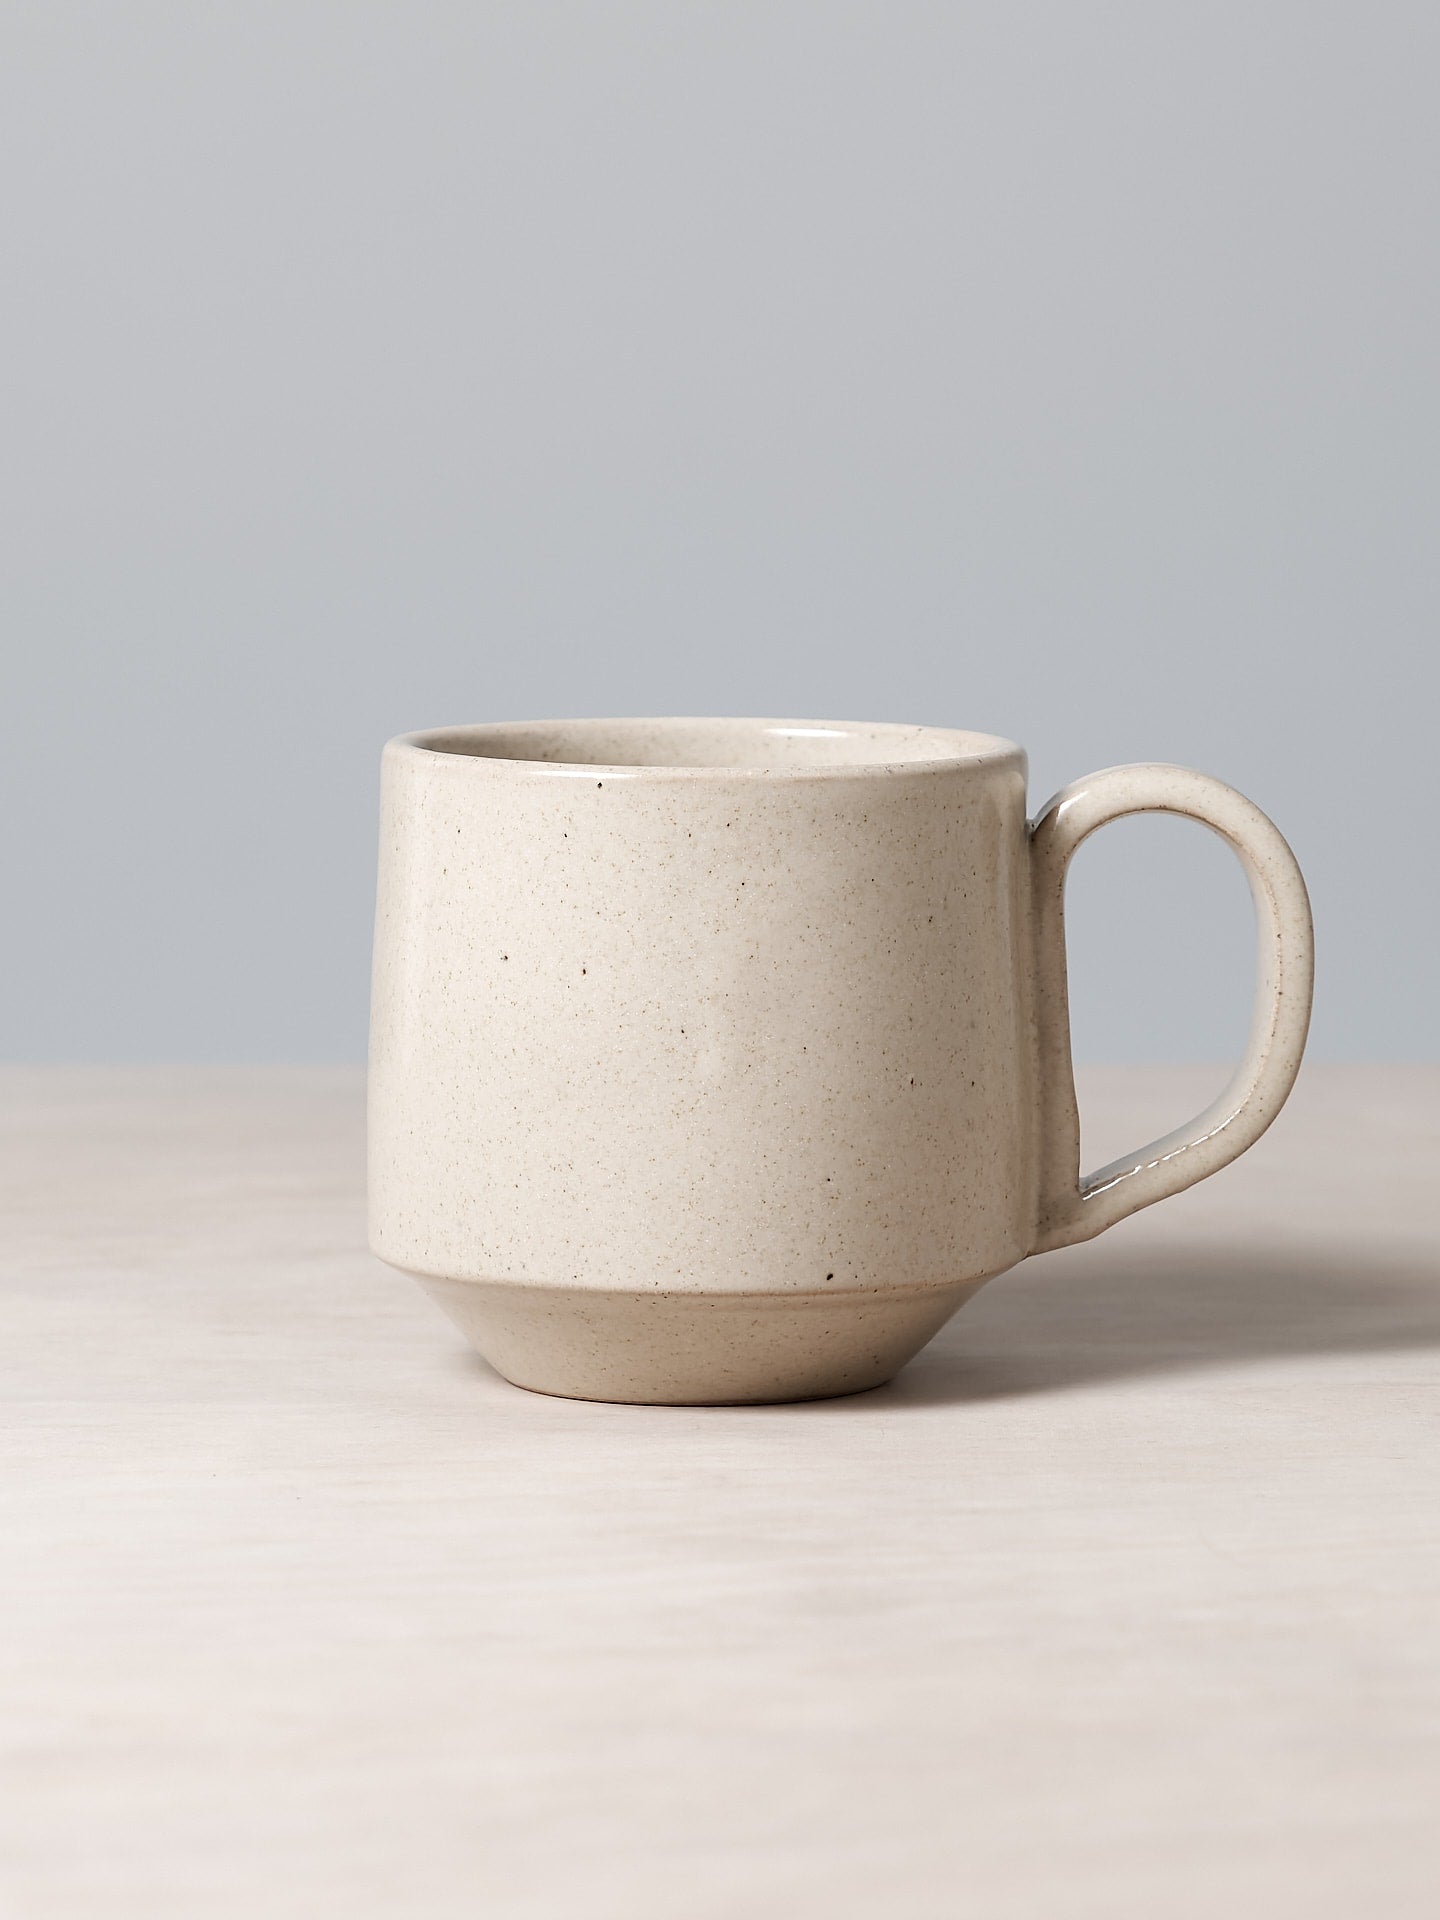 A Large Stacking Mug – Beige, from the Richard Beauchamp brand, sitting on a wooden table.